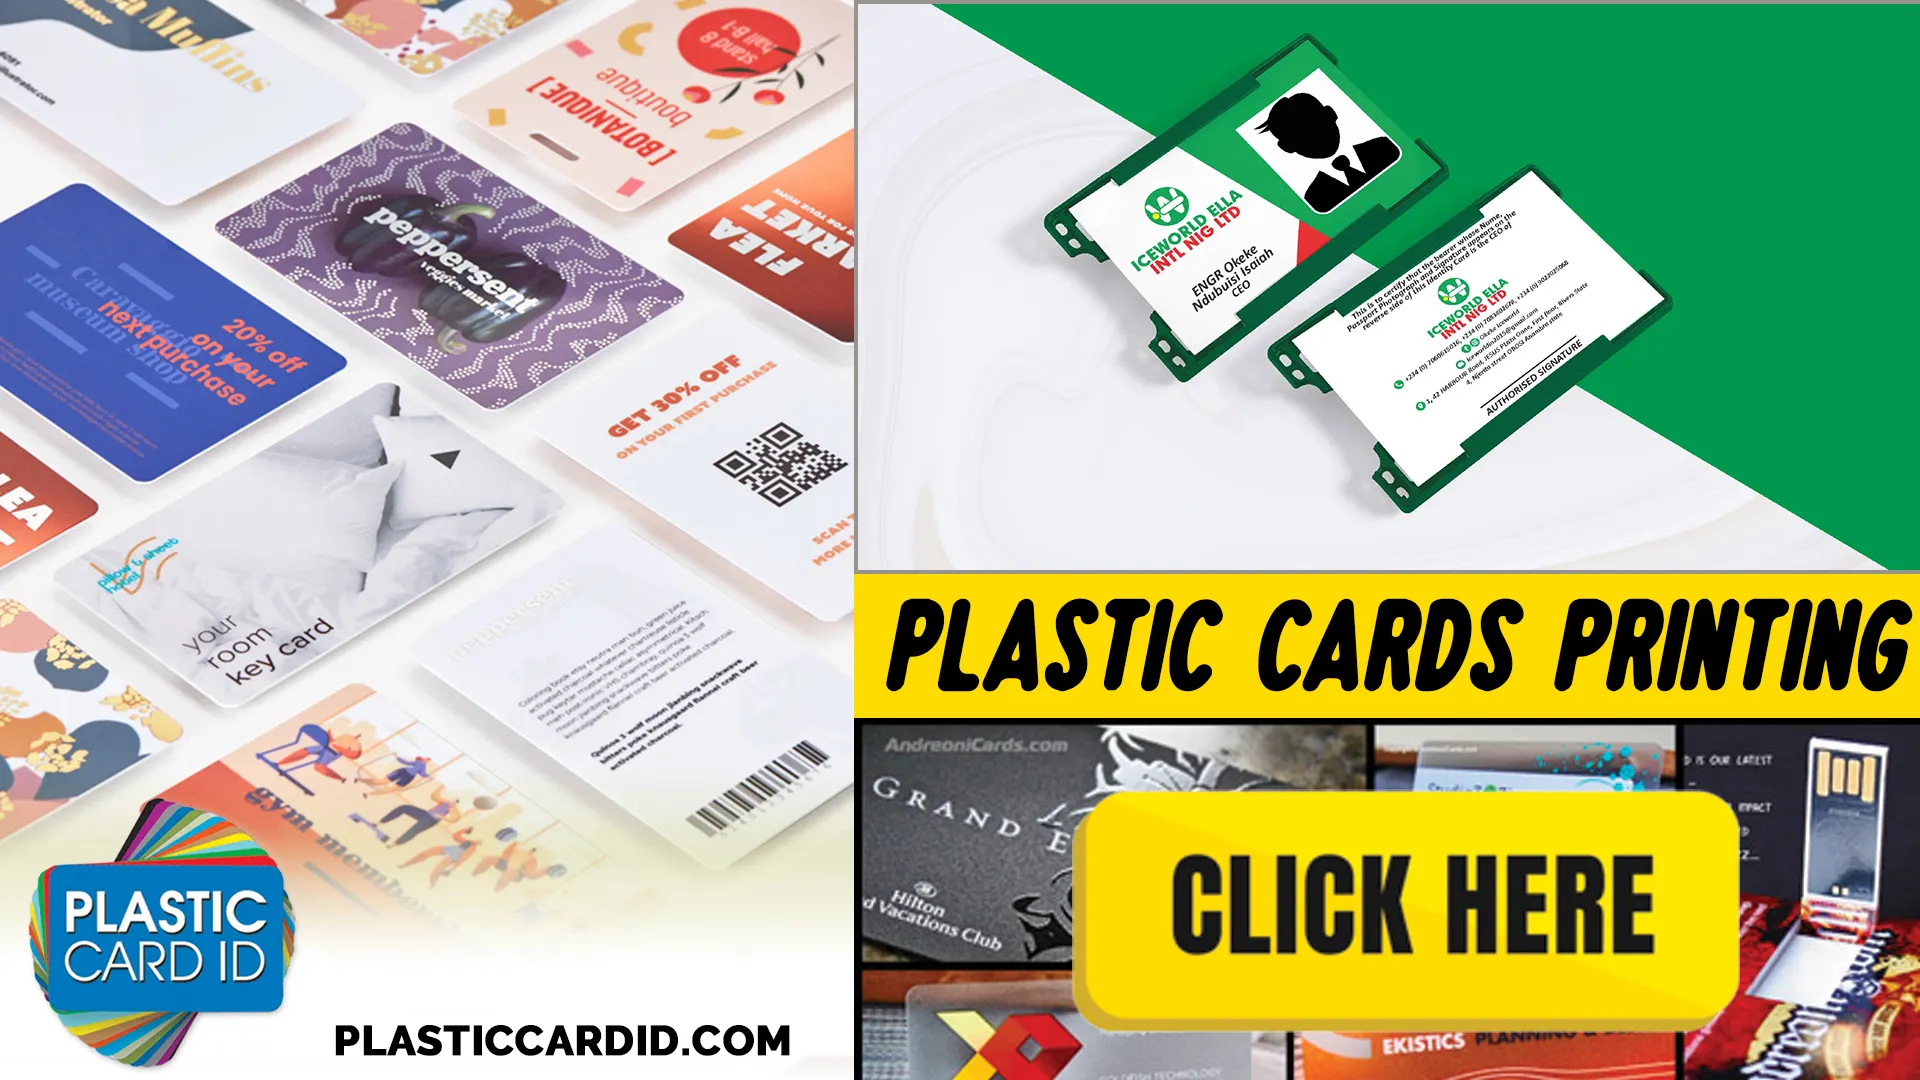 Product Range: Plastic Cards and Card Printers from Plastic Card ID




